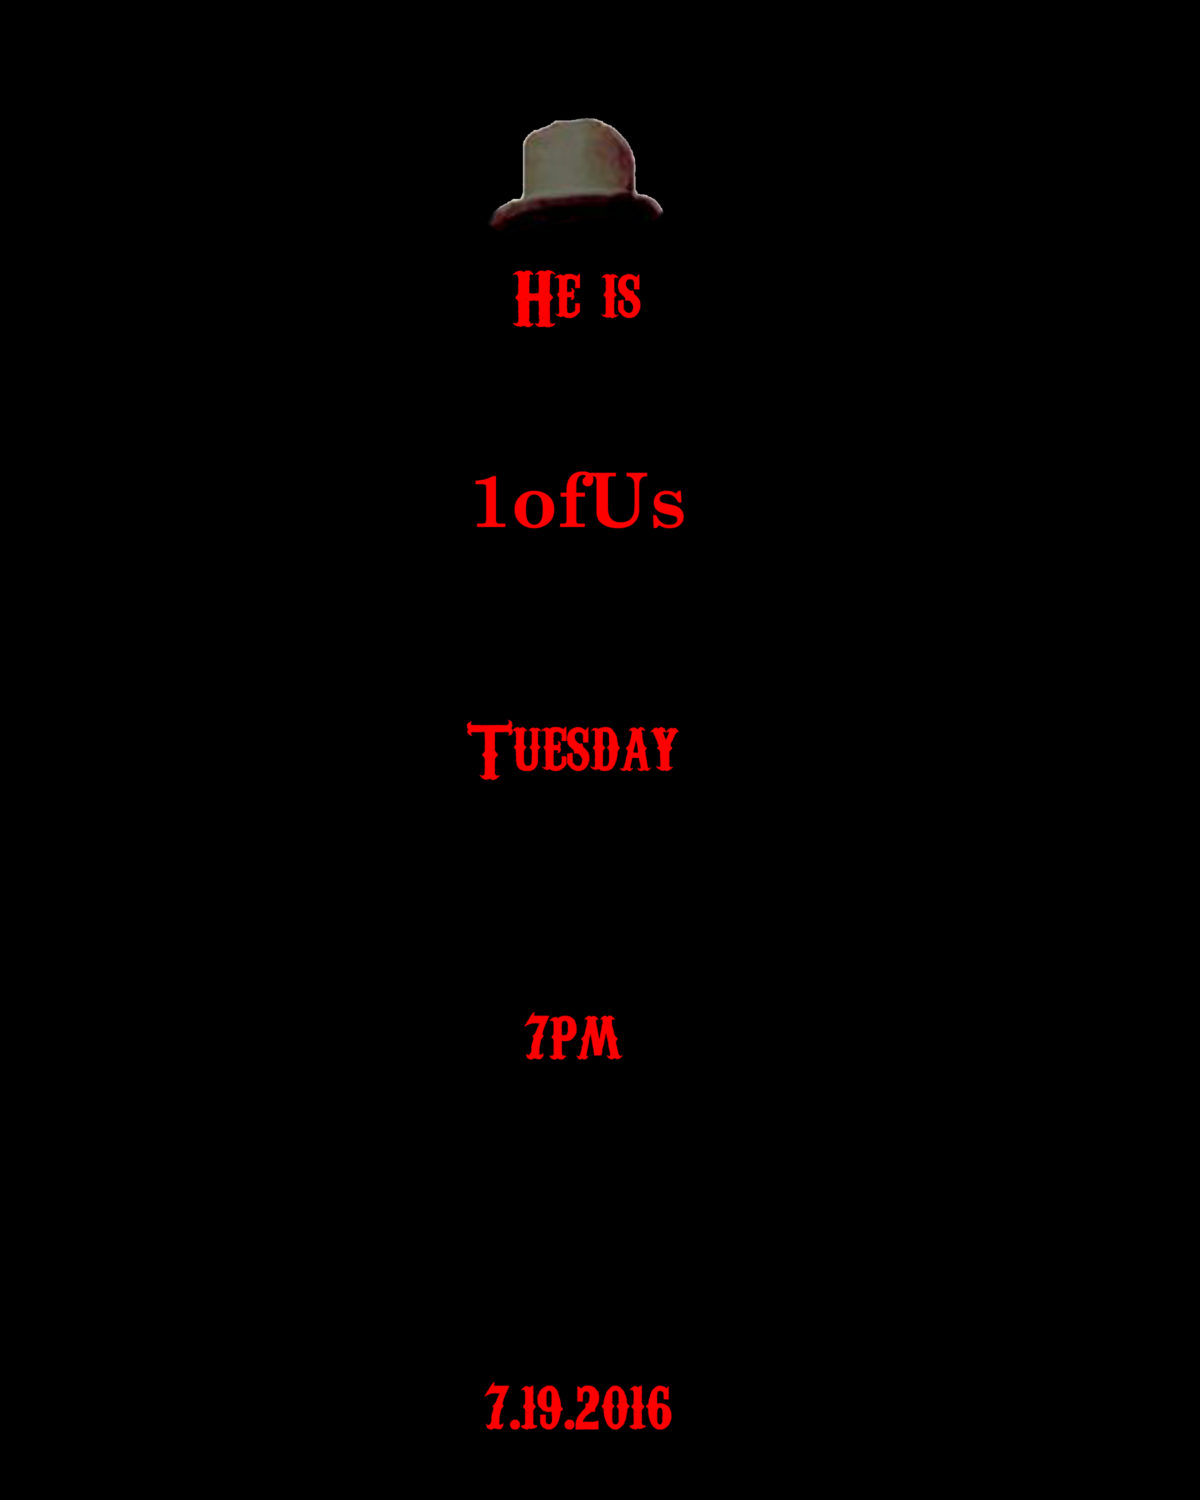 1ofUs Tuesday 7.19.2016